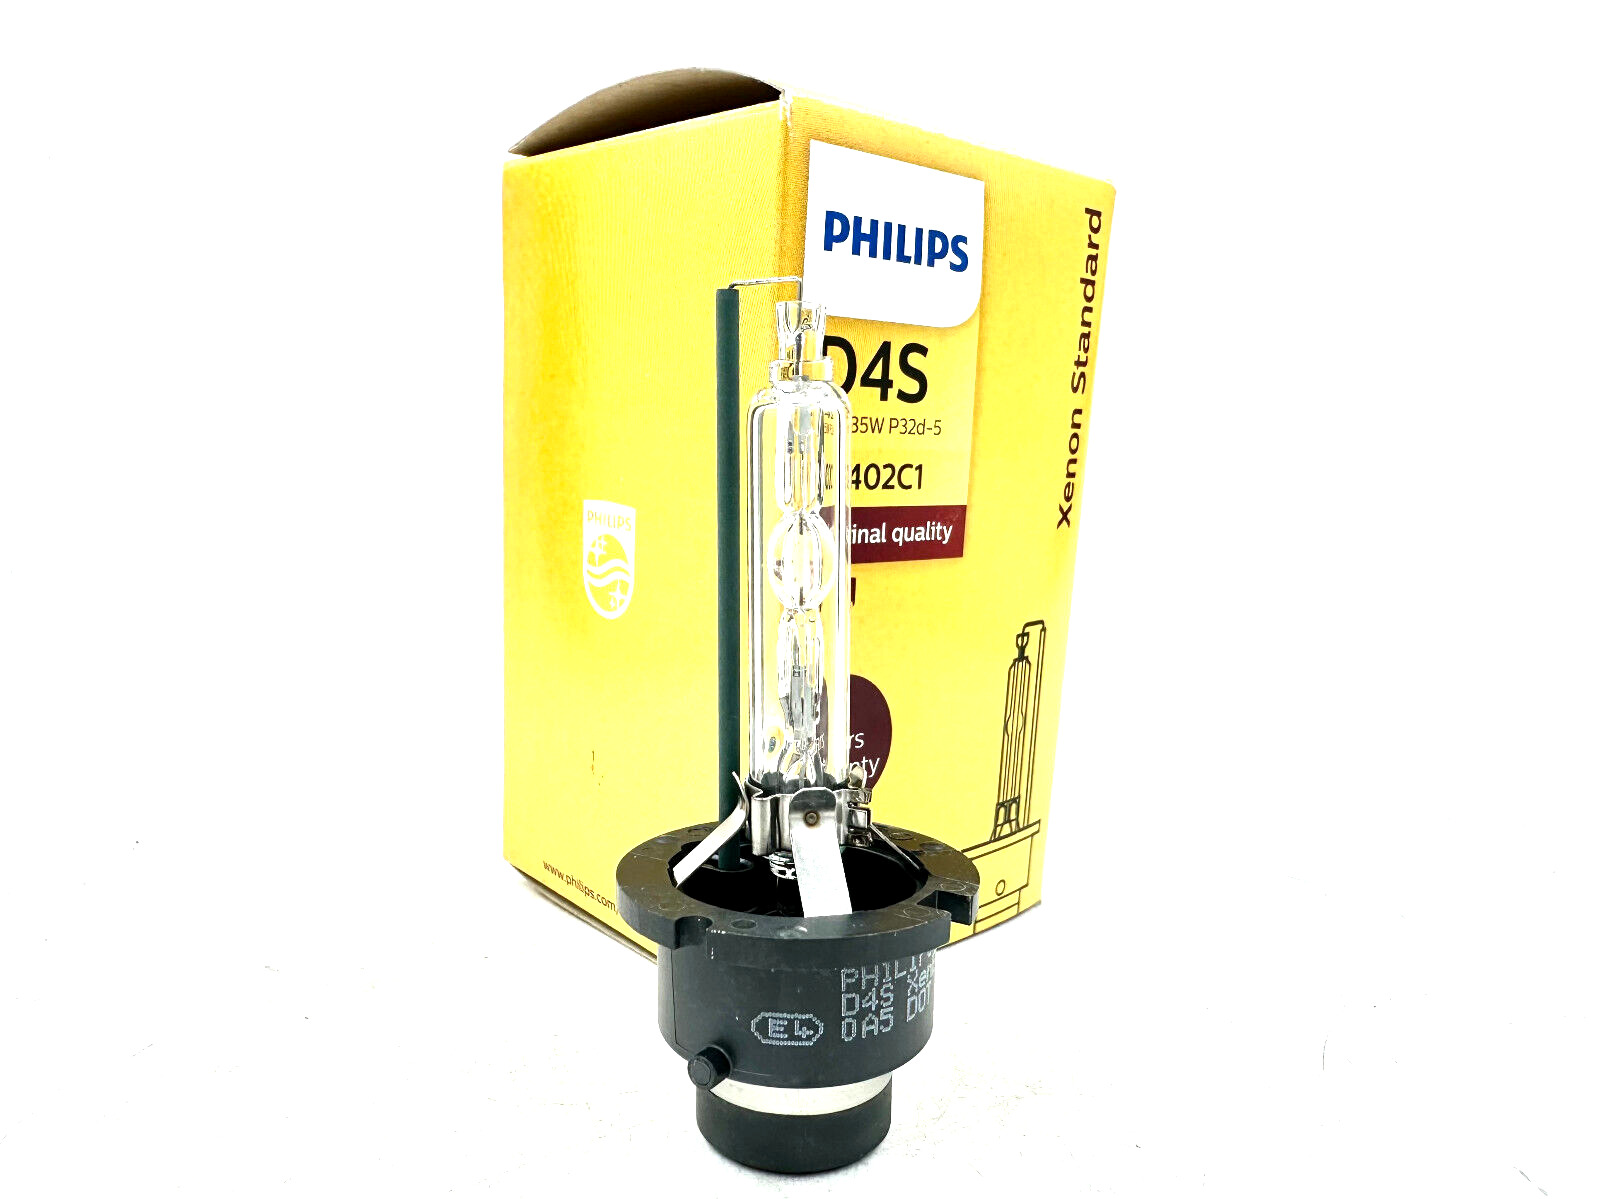 One (1) New OEM Philips D4S 35W 4300K 42402 HID Bulb for Xenon Headlight